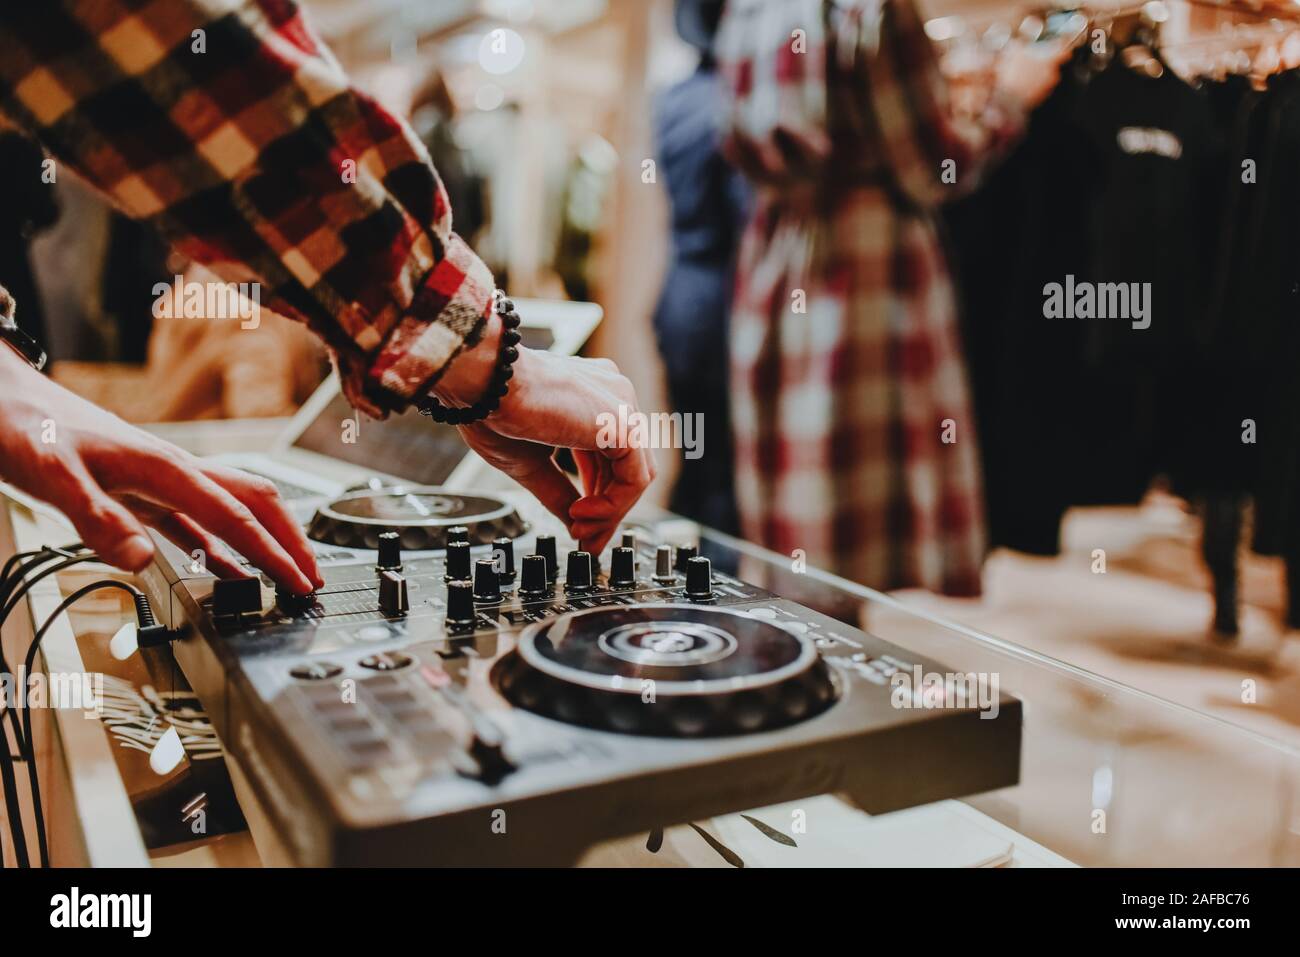 Dj mixes tracks at store opening event Stock Photo